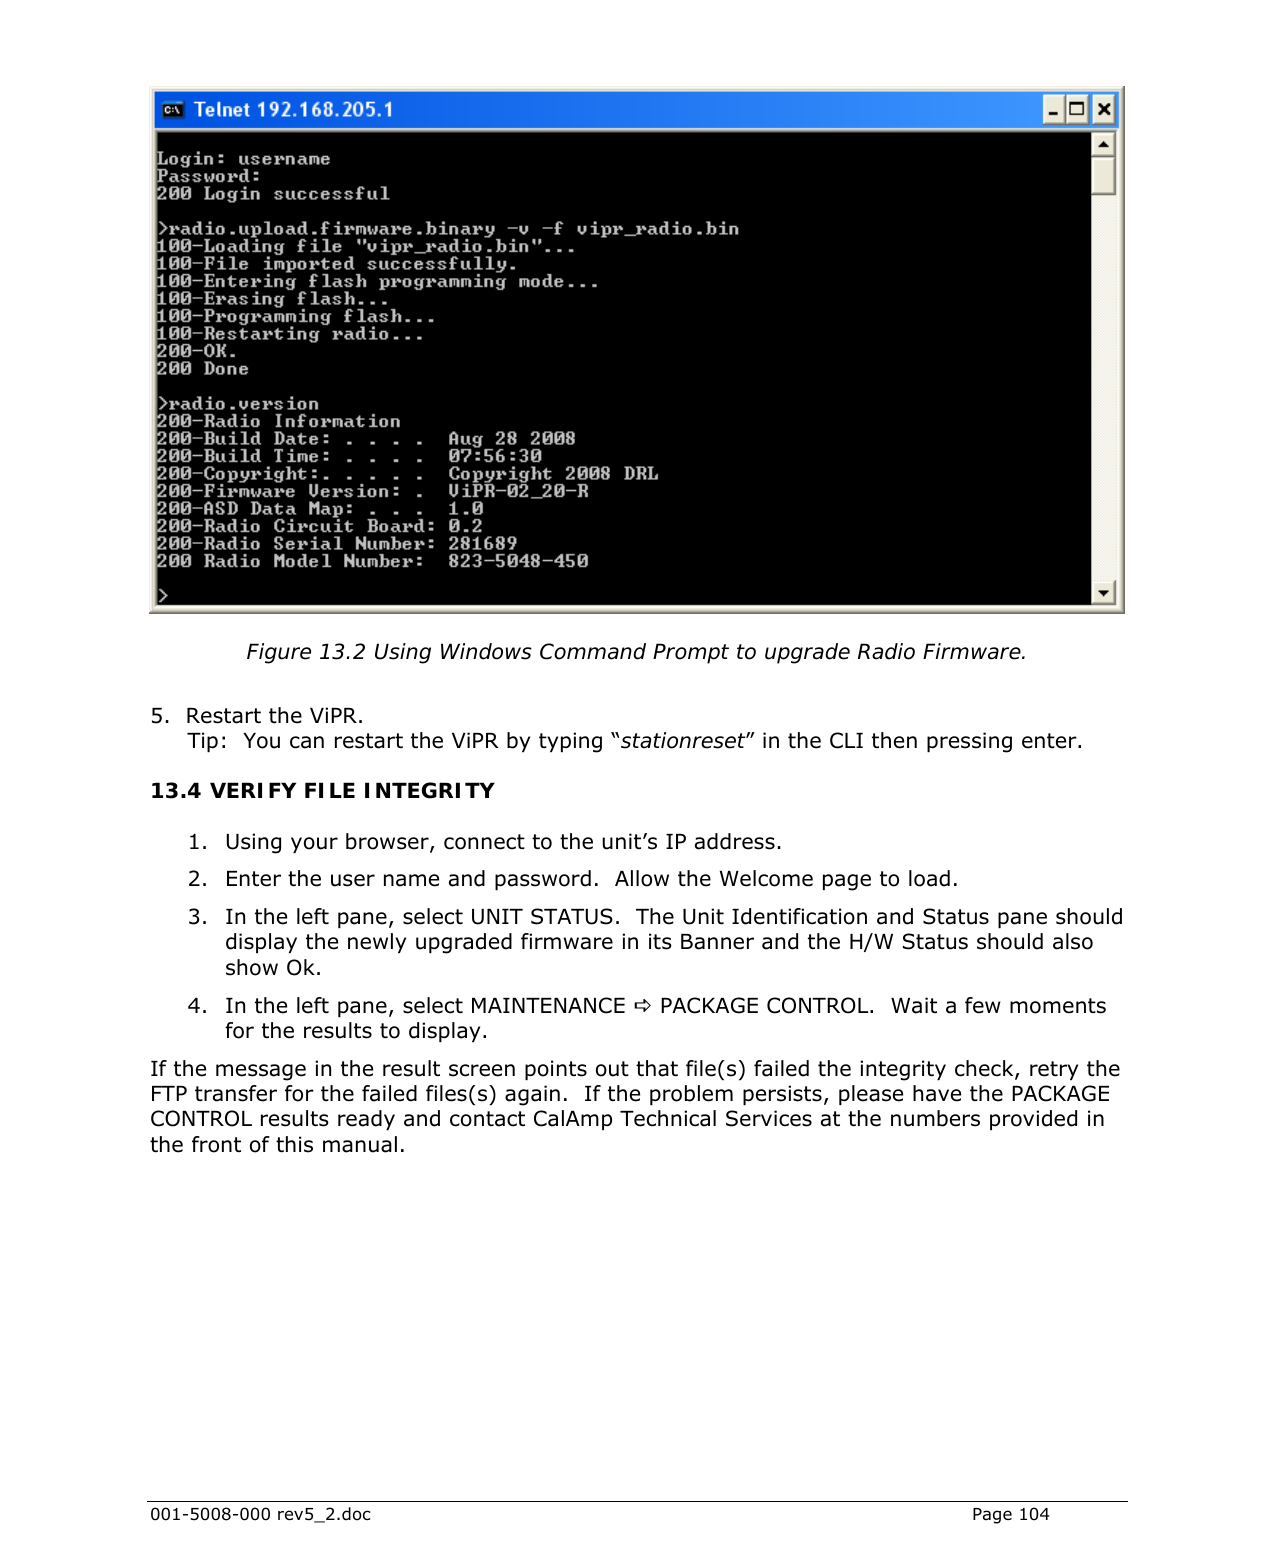  001-5008-000 rev5_2.doc    Page 104   Figure 13.2 Using Windows Command Prompt to upgrade Radio Firmware.  5.  Restart the ViPR.   Tip:  You can restart the ViPR by typing “stationreset” in the CLI then pressing enter. 13.4 VERIFY FILE INTEGRITY 1. Using your browser, connect to the unit’s IP address.  2. Enter the user name and password.  Allow the Welcome page to load.  3. In the left pane, select UNIT STATUS.  The Unit Identification and Status pane should display the newly upgraded firmware in its Banner and the H/W Status should also show Ok. 4. In the left pane, select MAINTENANCE D PACKAGE CONTROL.  Wait a few moments for the results to display.  If the message in the result screen points out that file(s) failed the integrity check, retry the FTP transfer for the failed files(s) again.  If the problem persists, please have the PACKAGE CONTROL results ready and contact CalAmp Technical Services at the numbers provided in the front of this manual.